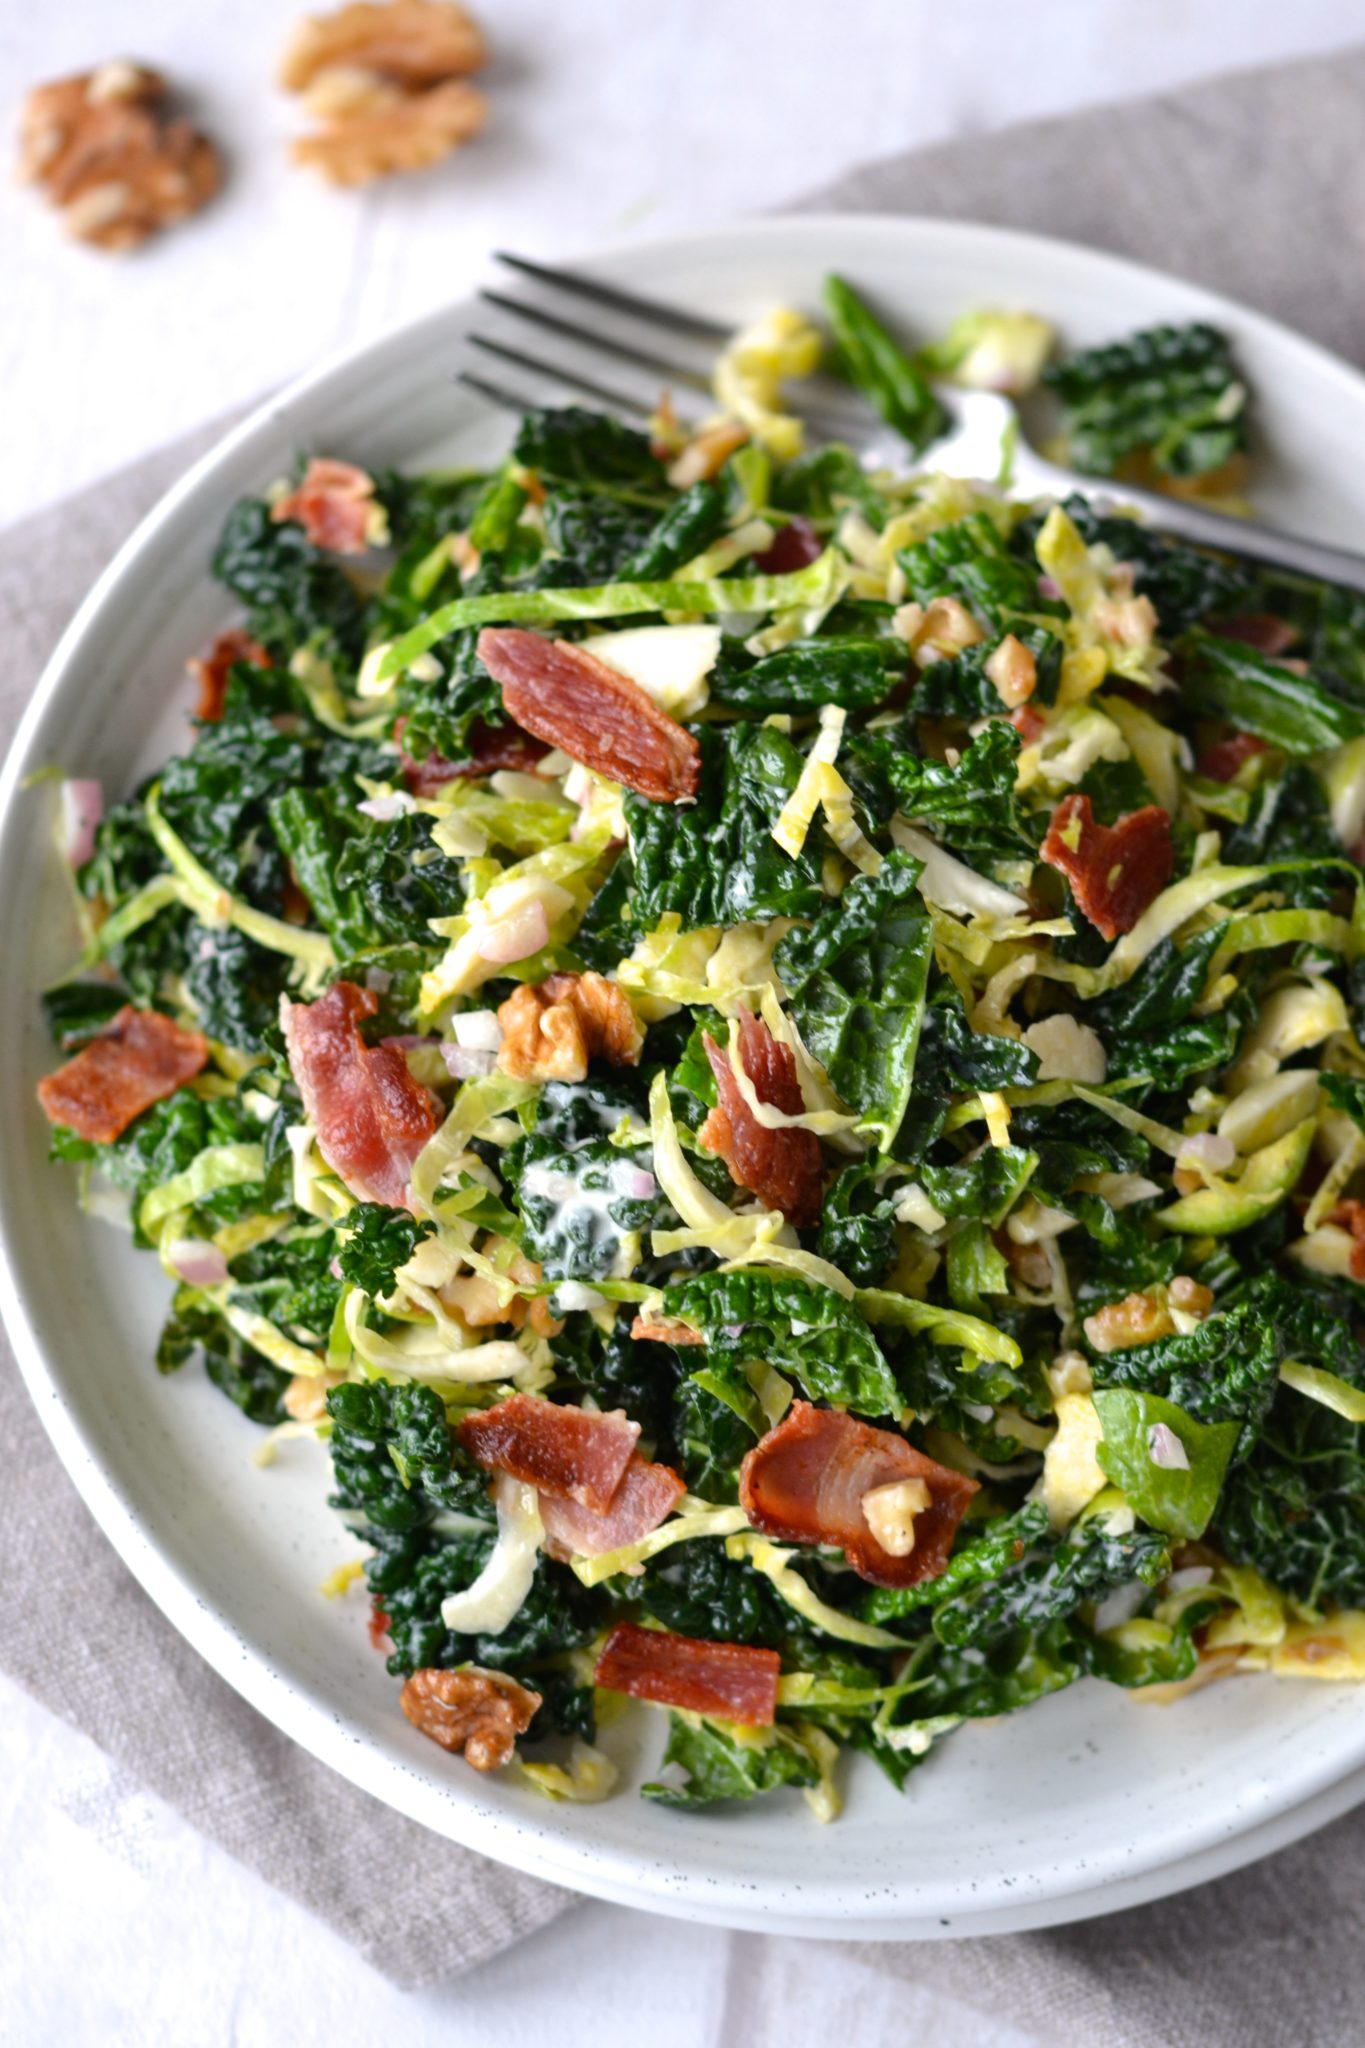 Kale & Brussels Sprout Salad with Creamy Lemon Dressing | Every Last Bite